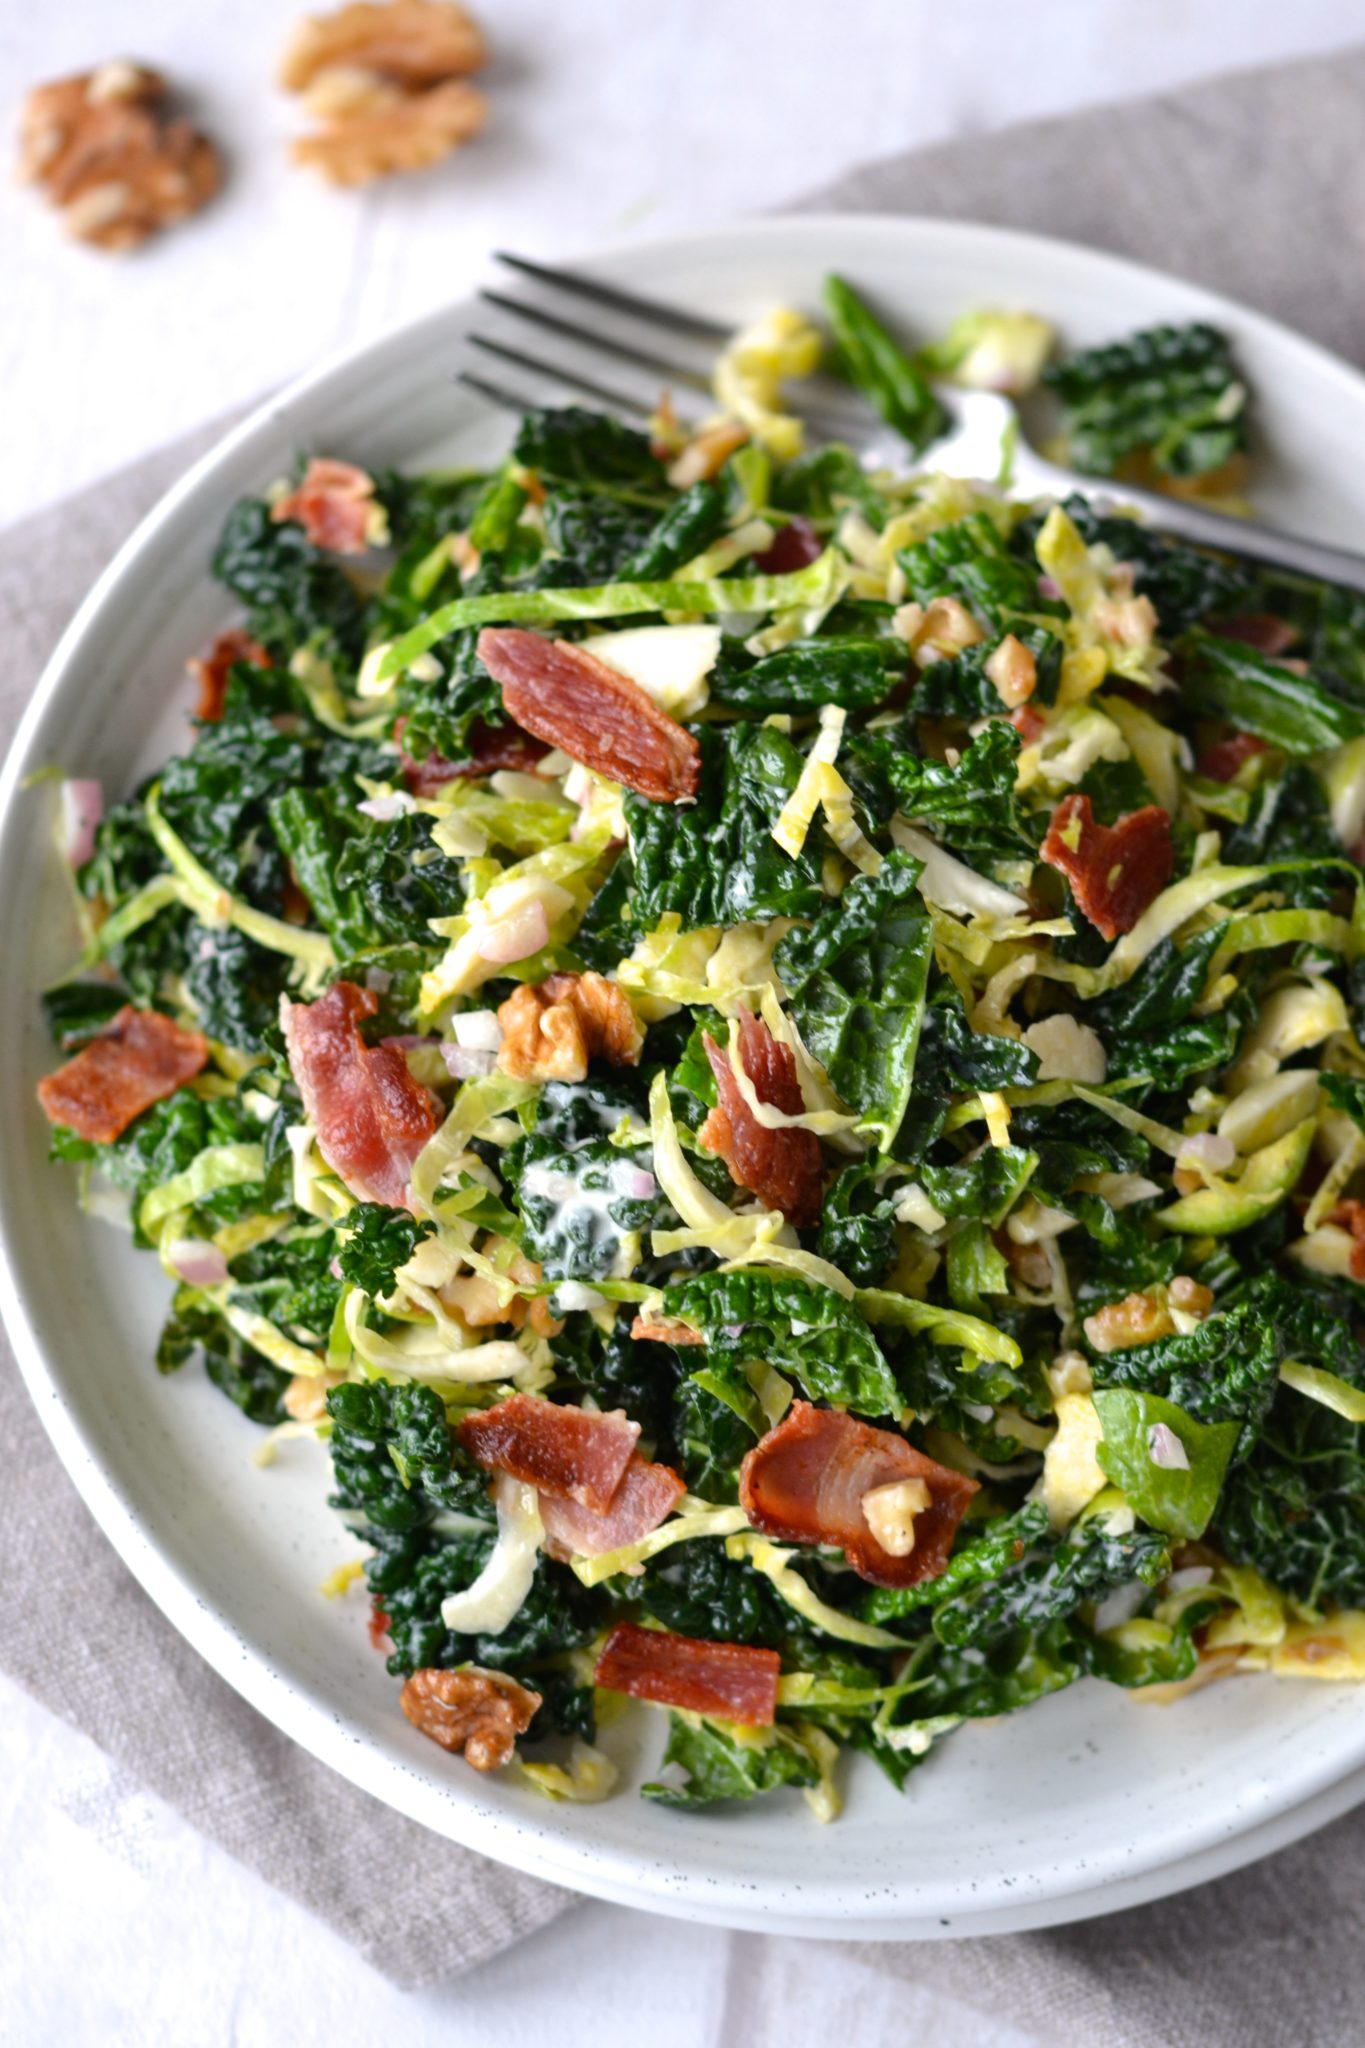 Kale & Brussels Sprout Salad with Creamy Lemon Dressing | Every Last Bite